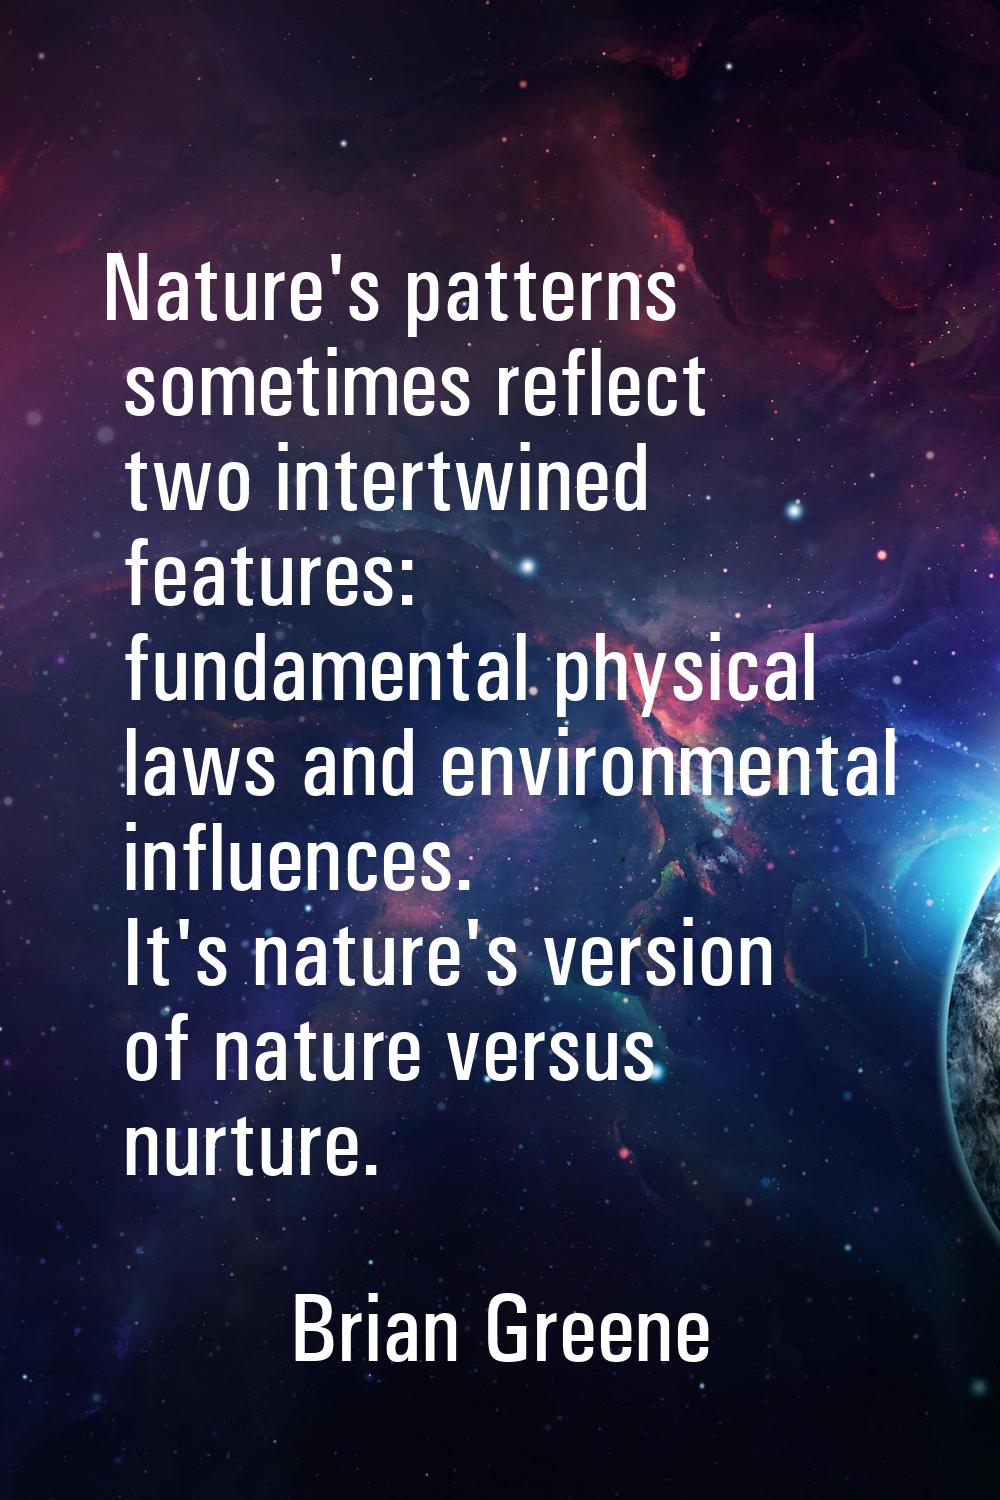 Nature's patterns sometimes reflect two intertwined features: fundamental physical laws and environ